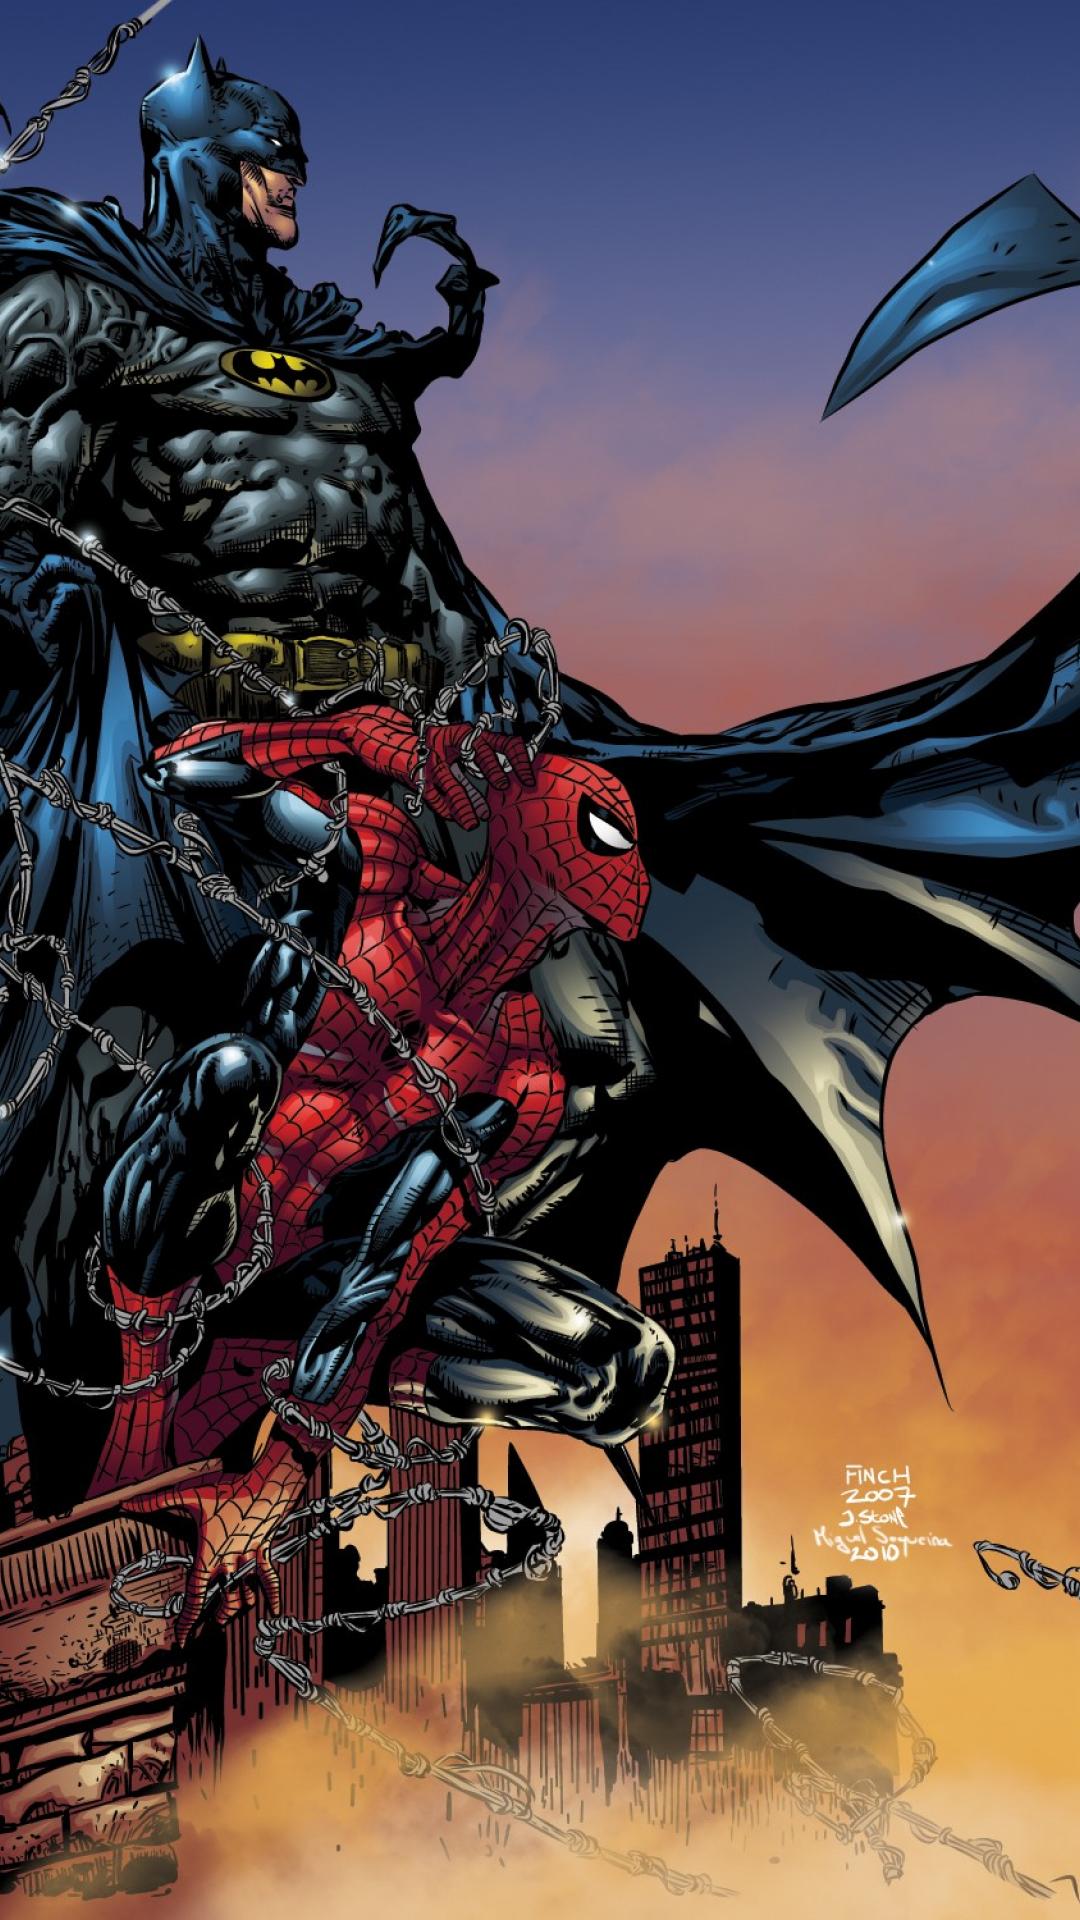 Batman and SpiderMan colour by Rustyoldtown on DeviantArt